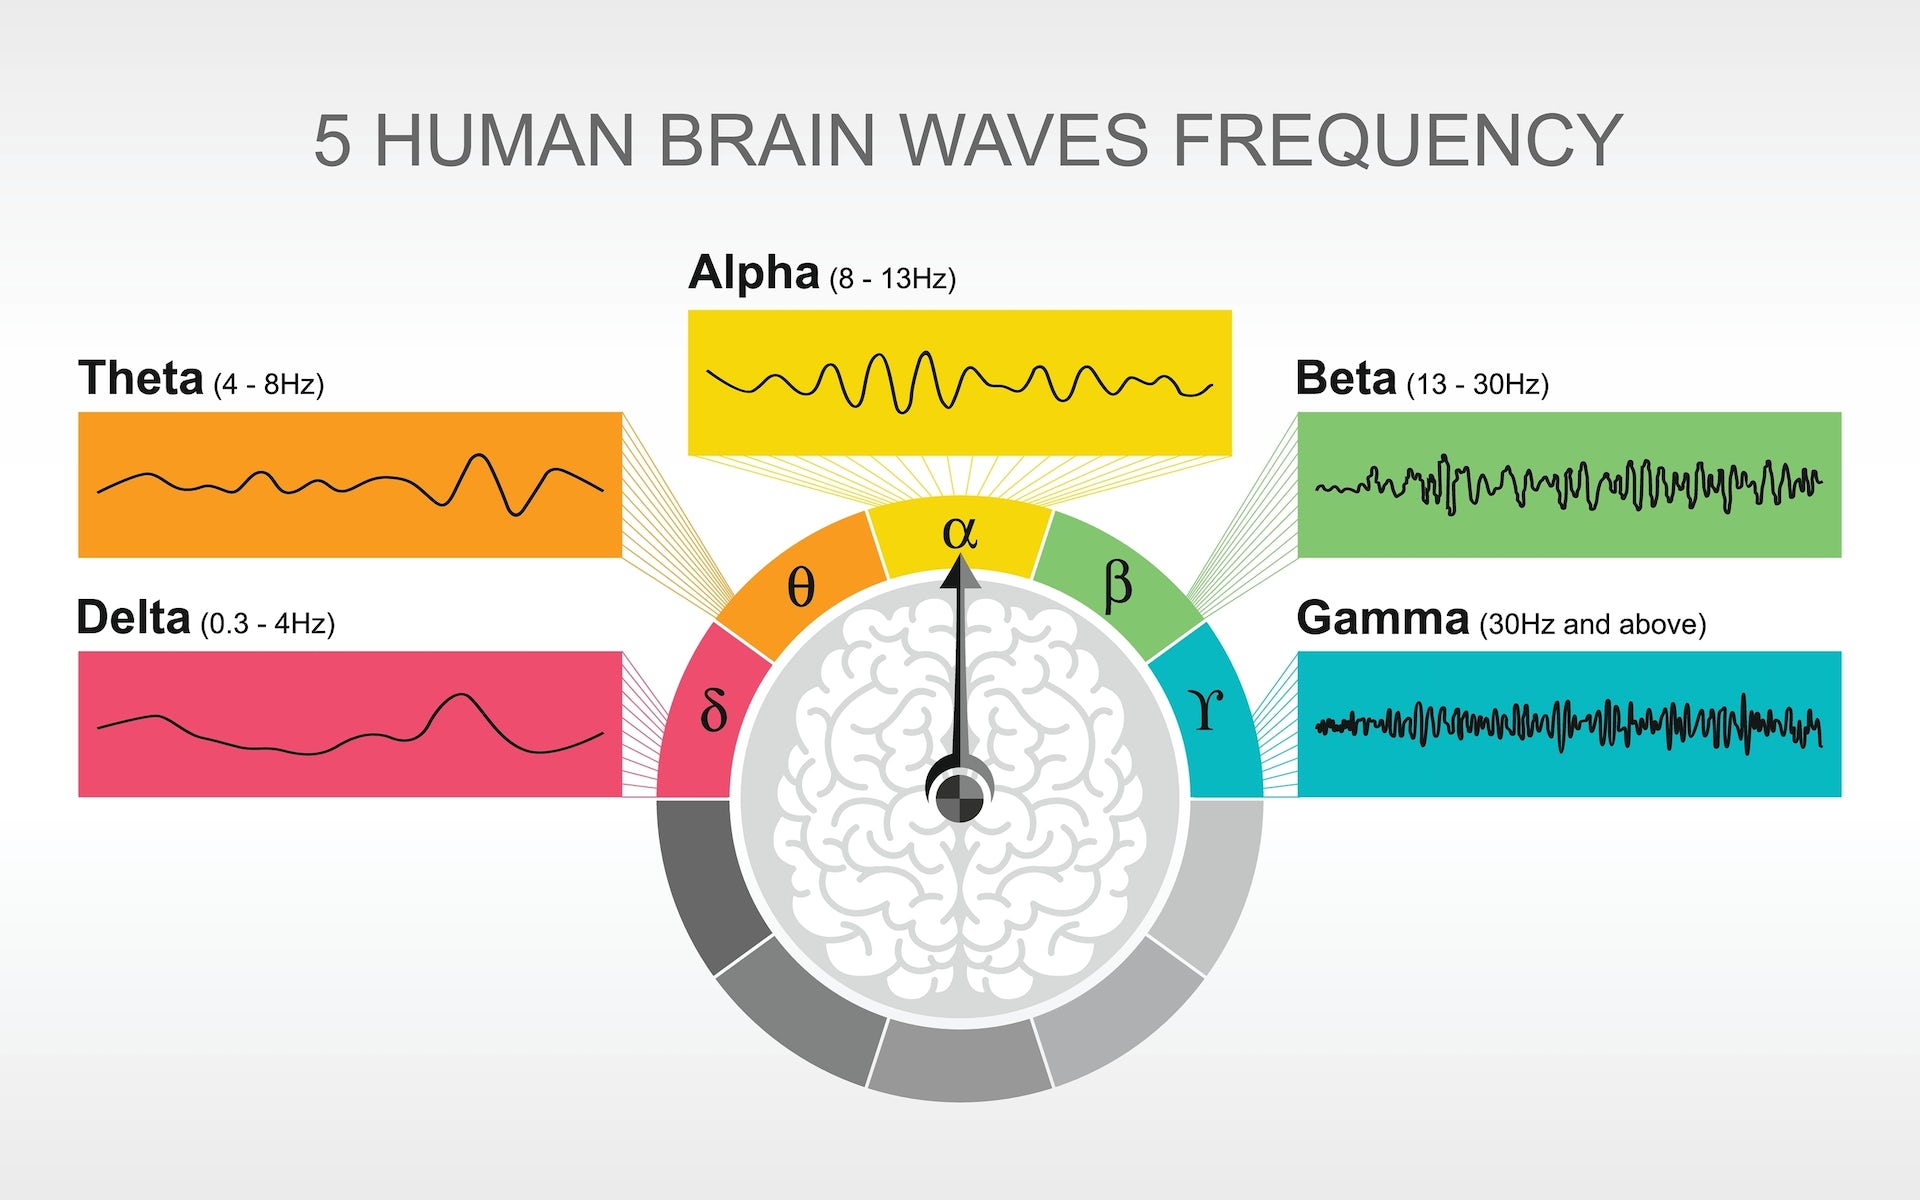 Understanding Brain States and Brain Waves: Alpha, Beta, Theta - Can They Be Controlled?